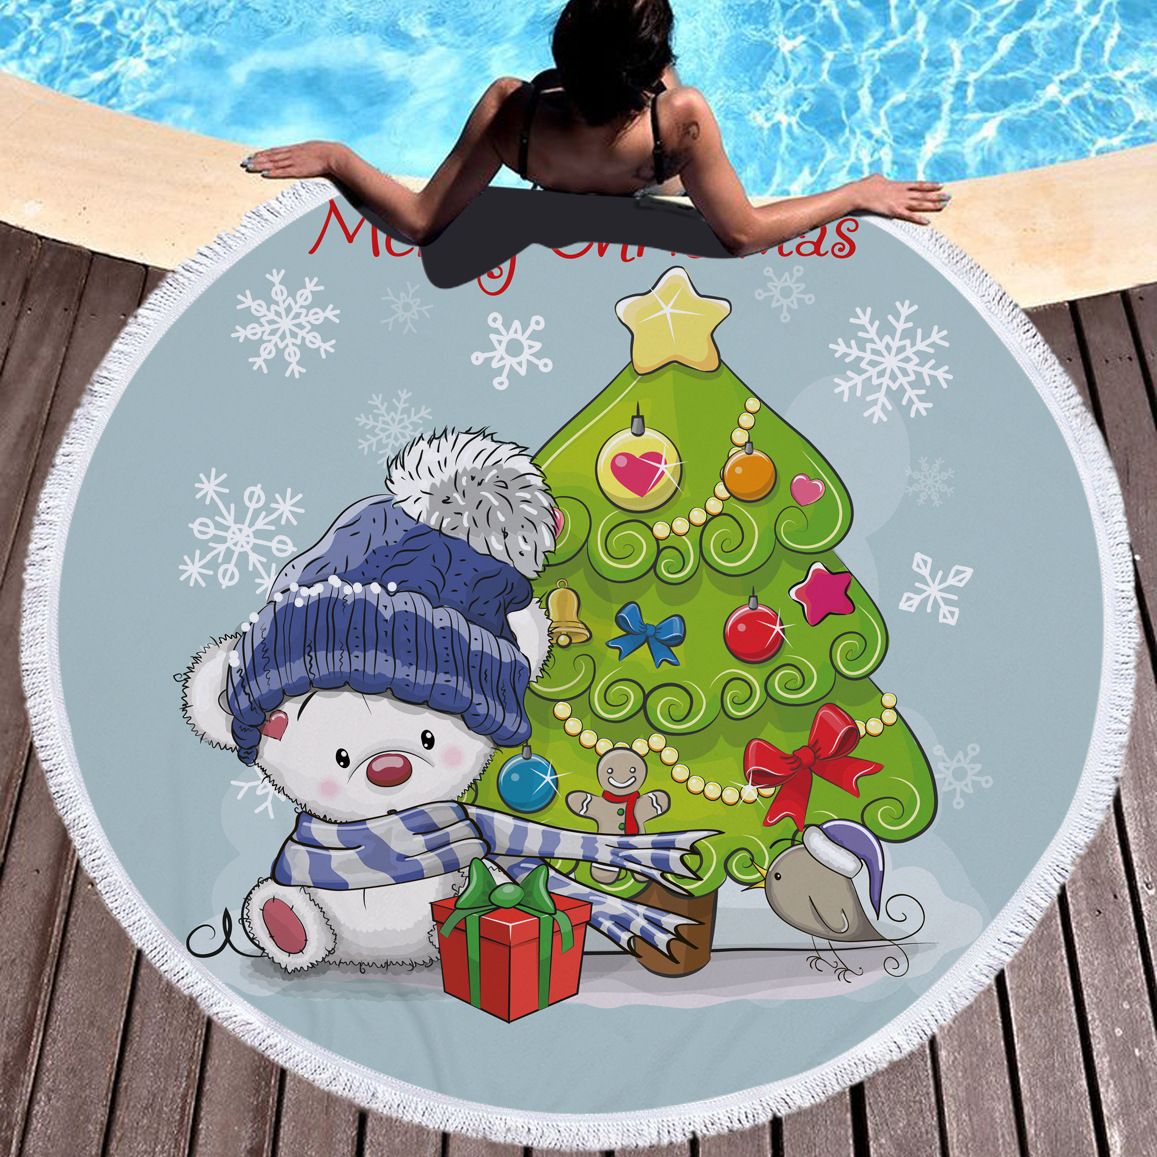 150x150cm Round Beach Towel With Tassels For Christmas Decorative Microfiber Wall Tapestry Seaside Resort Couple Big Bath Towel Tea Towel Hand Towels From